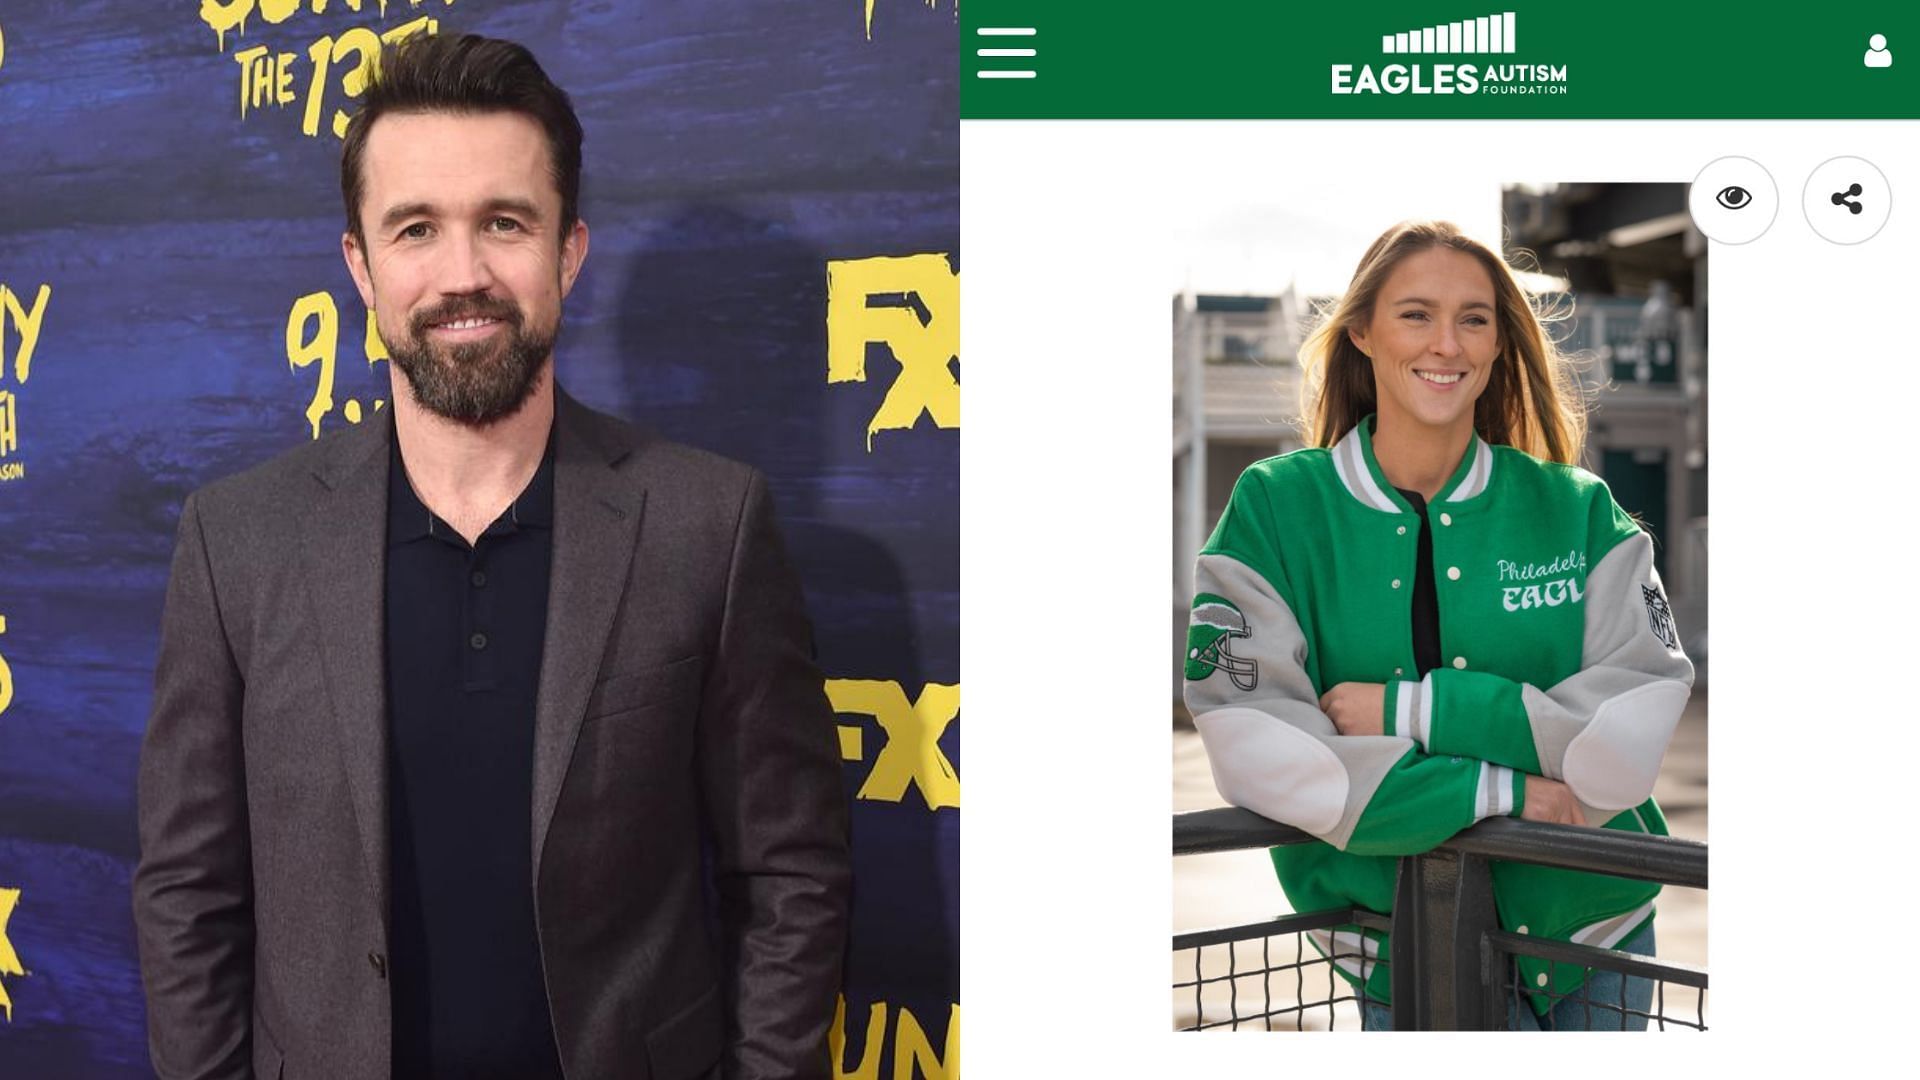 Rob McElhenney ups the ante with $62,000 bid for Jason Kelce&rsquo;s wife Kylie&rsquo;s 1990&rsquo;s Eagles jacket